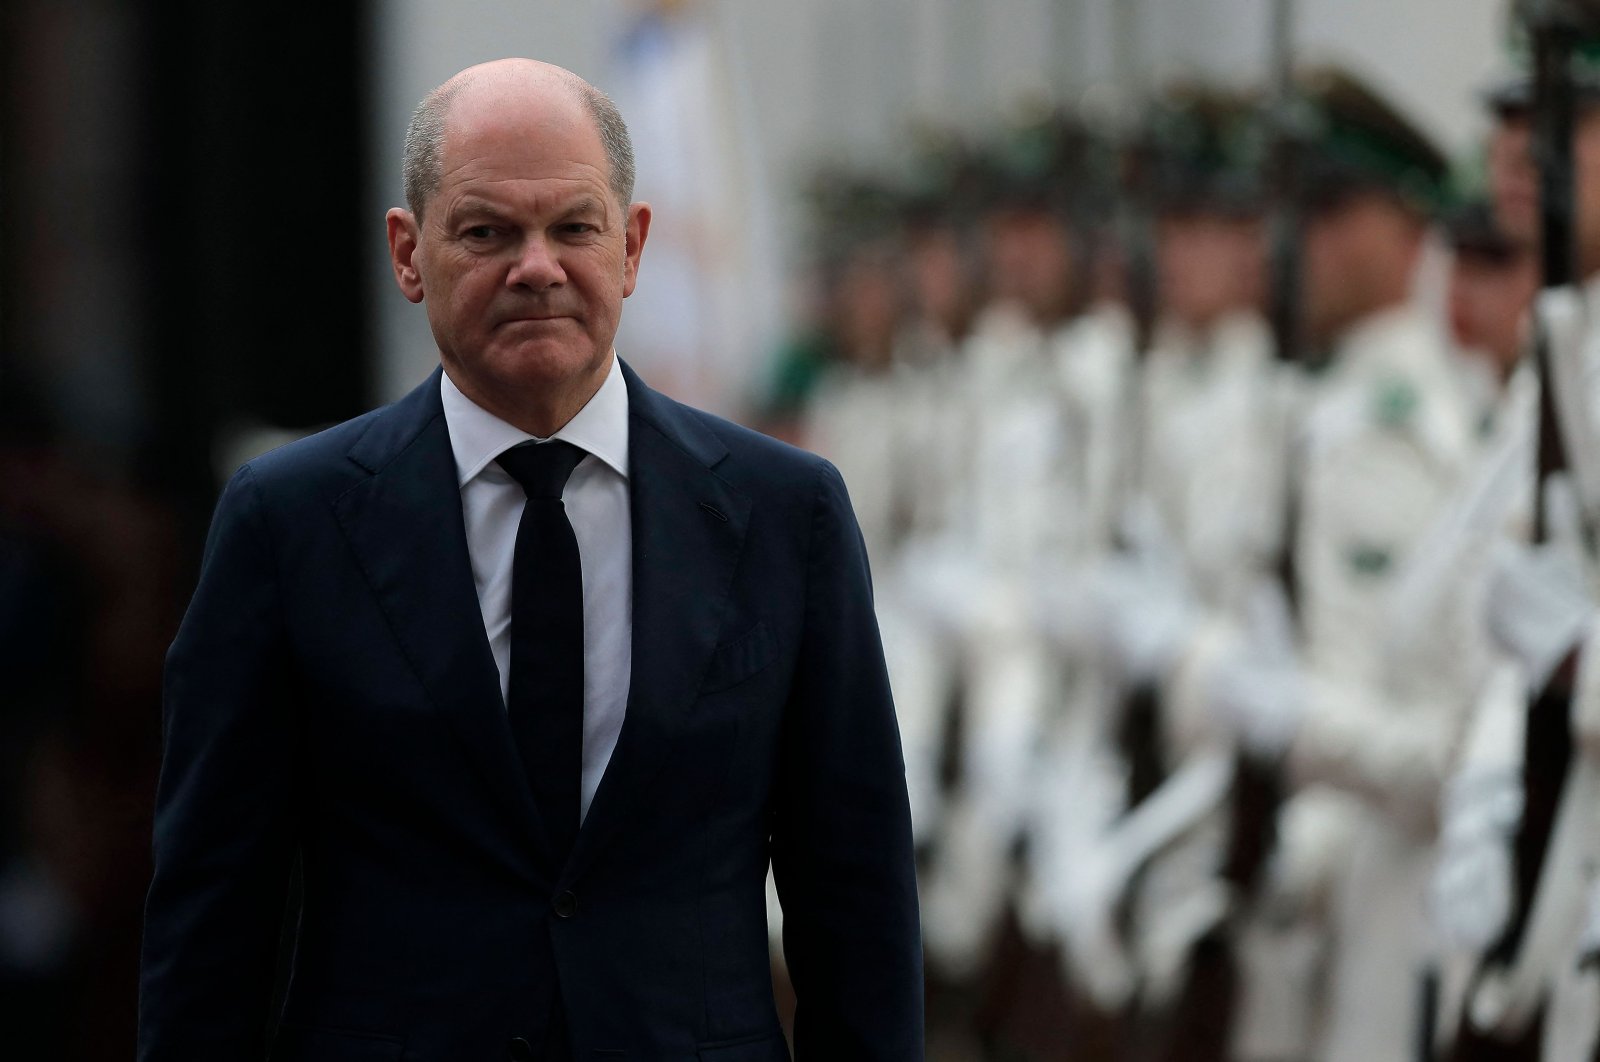 German Chancellor Olaf Scholz walks on arrival at the La Moneda presidential palace in Santiago, Chile, Jan. 29, 2023. (AFP Photo)